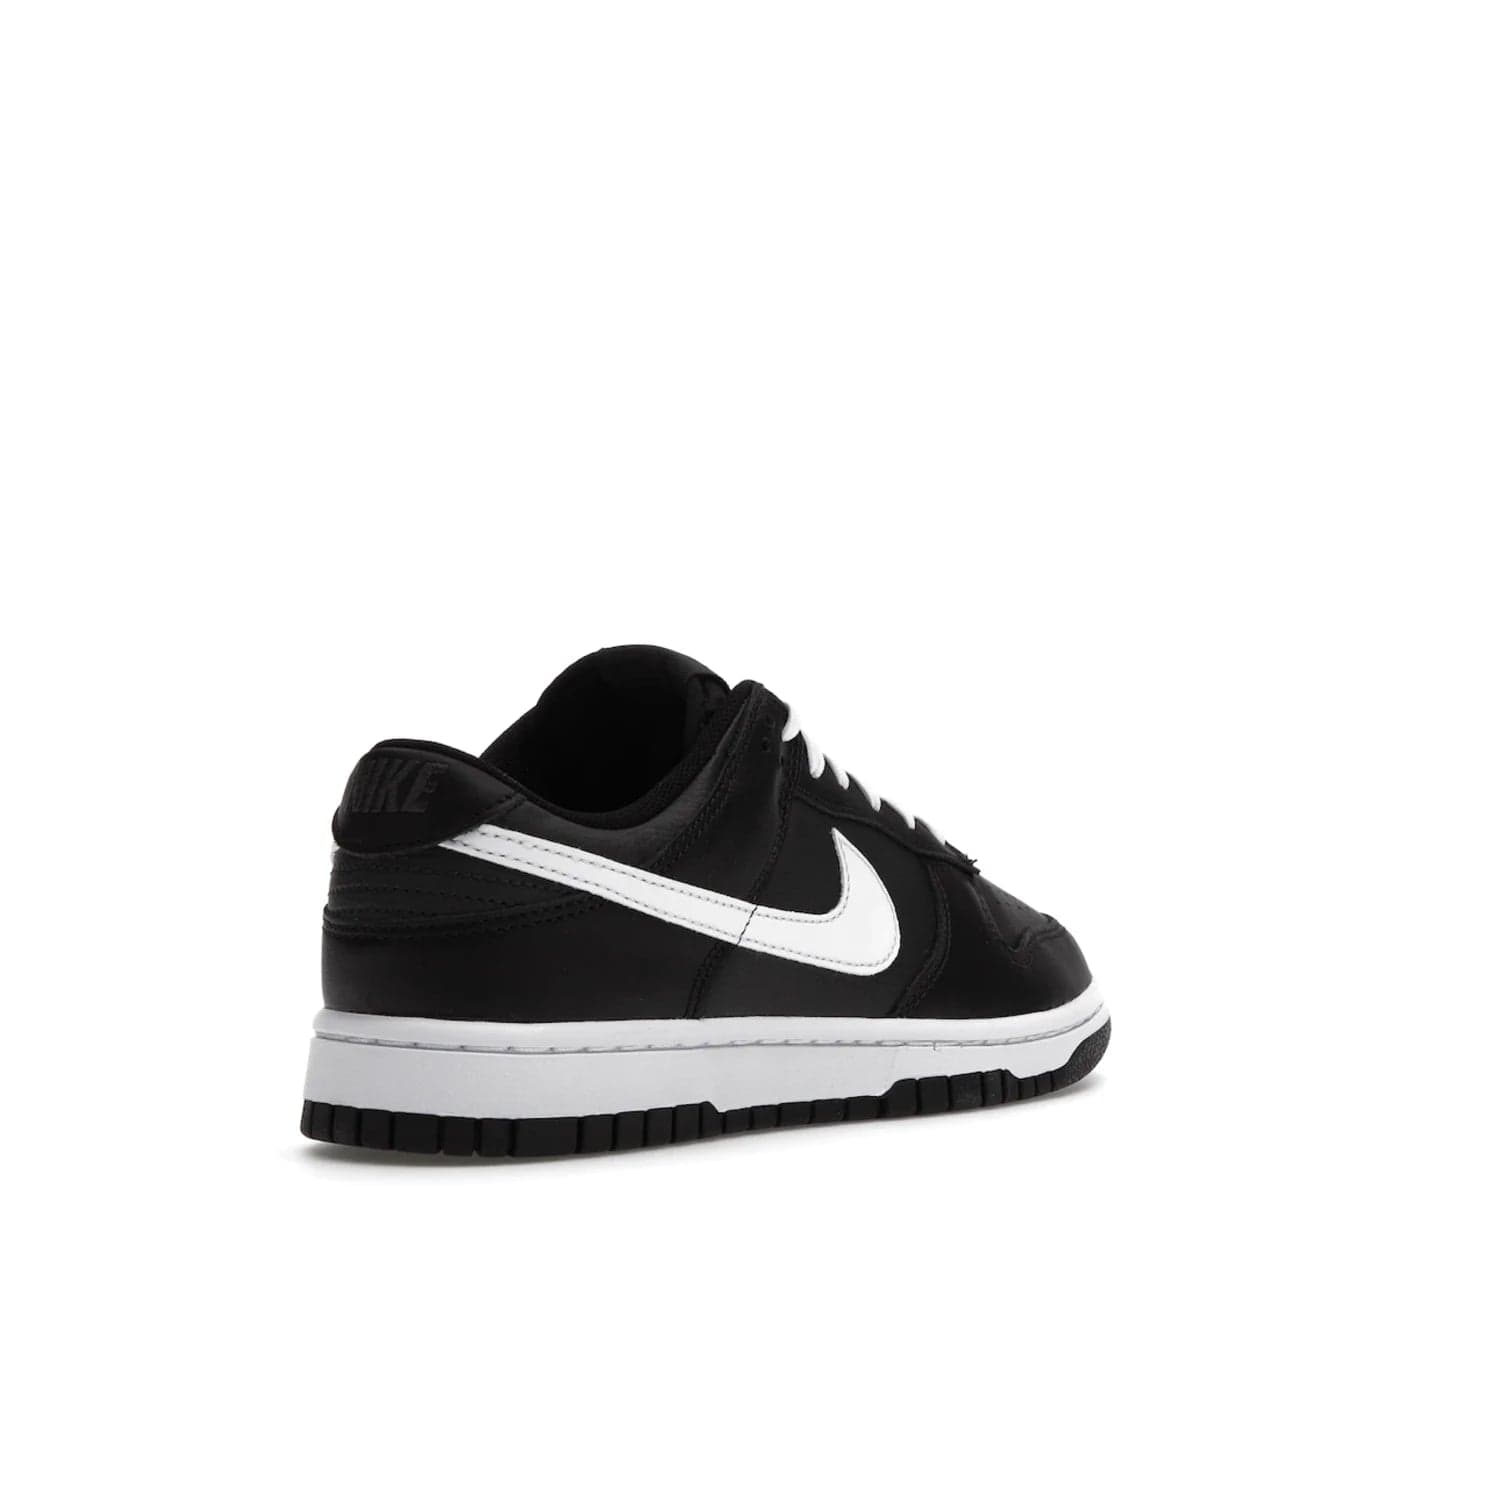 Nike Dunk Low Black White (2022) - Image 32 - Only at www.BallersClubKickz.com - A classic Nike Dunk Low in black and white. Its tumbled leather upper features leather overlays and white Nike Swooshes. The design also includes a woven tongue label and an EVA foam sole for cushioning and support. An effortlessly stylish and timeless look. The Nike Dunk Low Black White (2022) released in May. Step out in style.